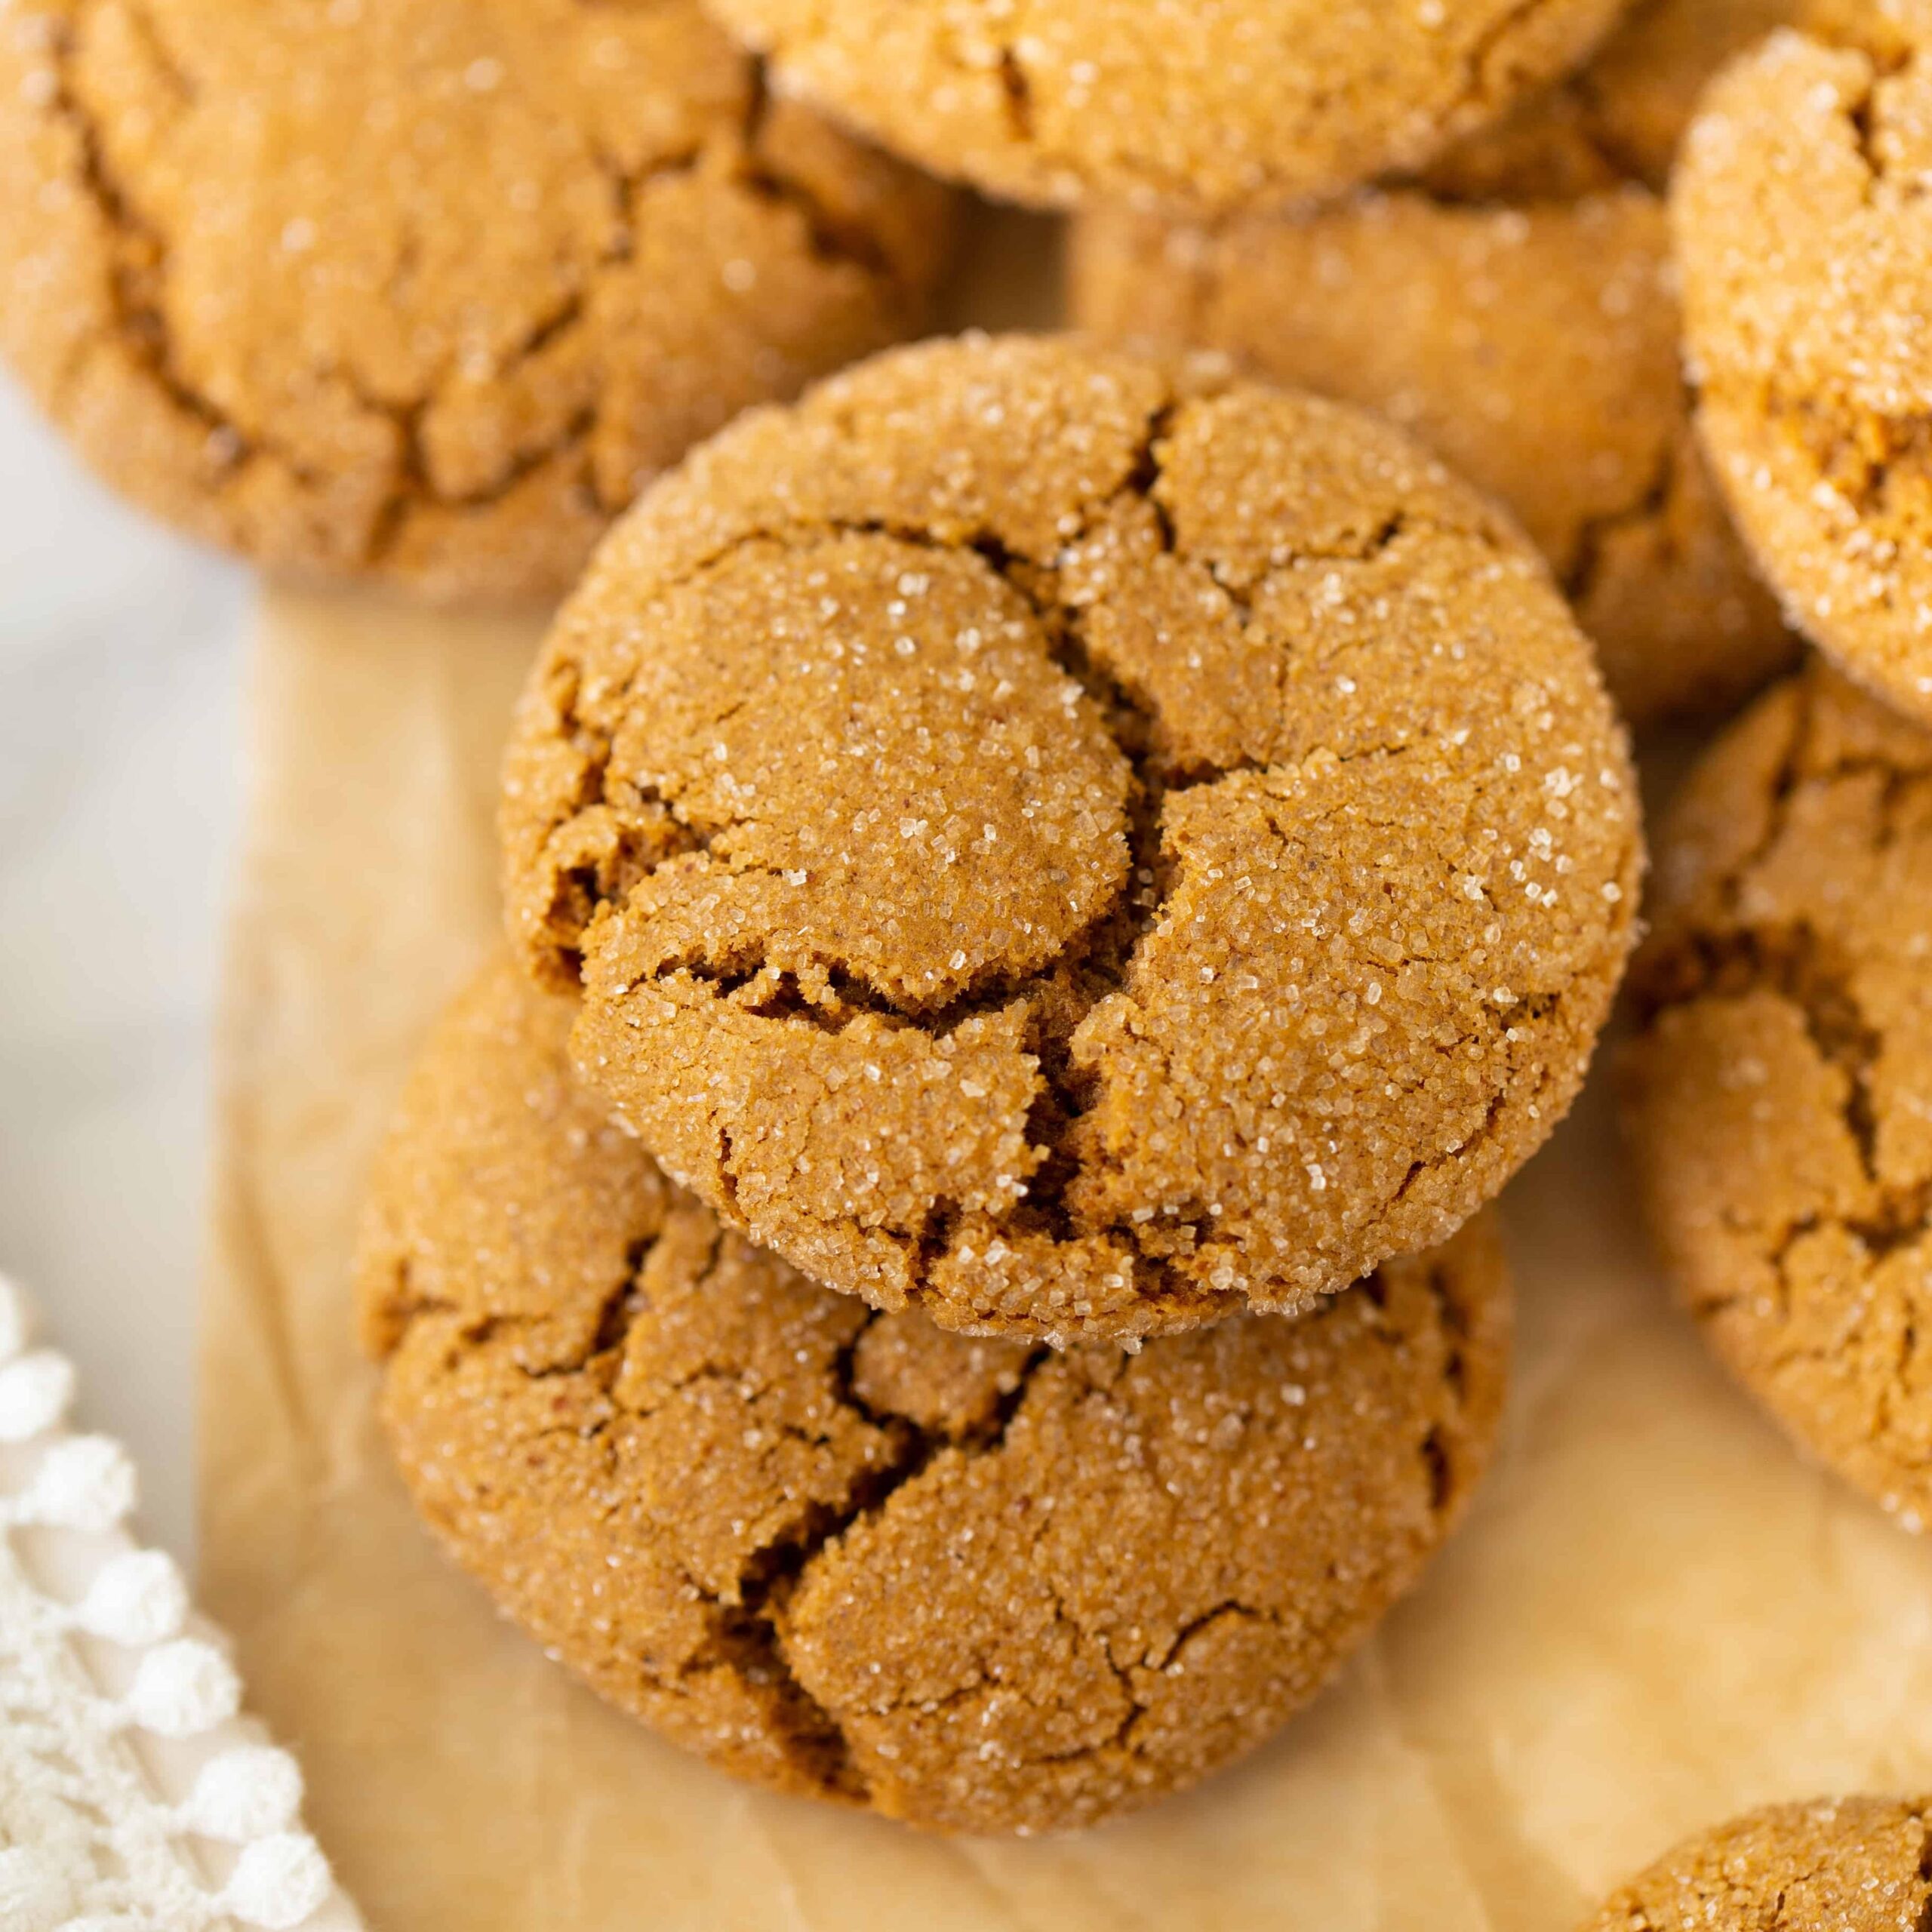  With a crispy outer layer and a soft inner center, these cookies are a texture-lover's dream.